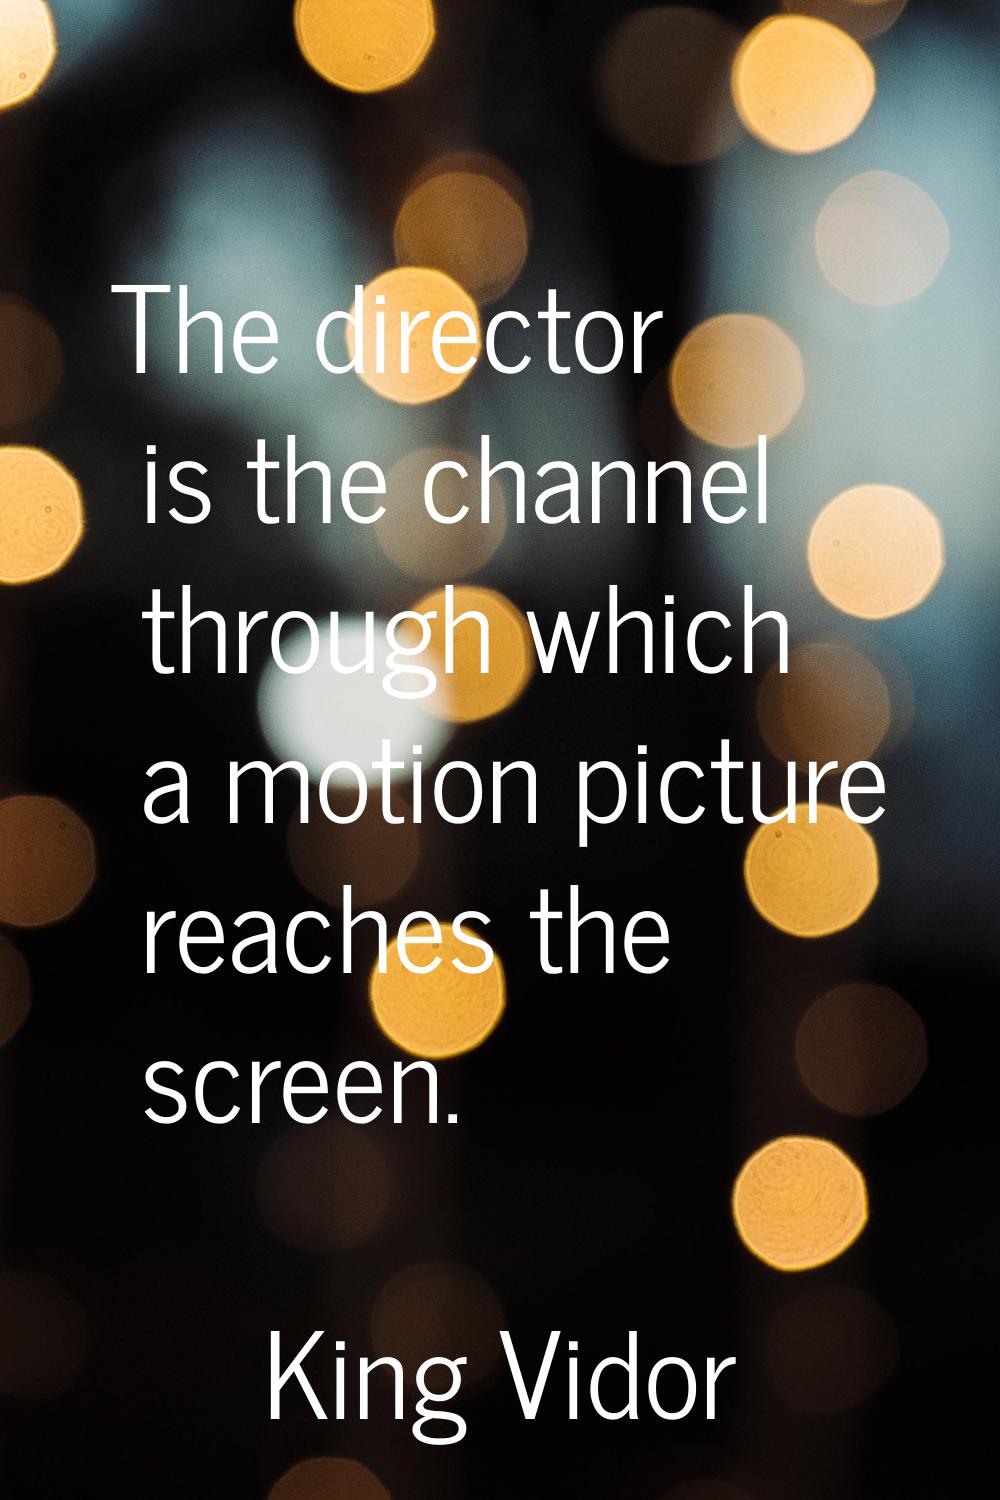 The director is the channel through which a motion picture reaches the screen.